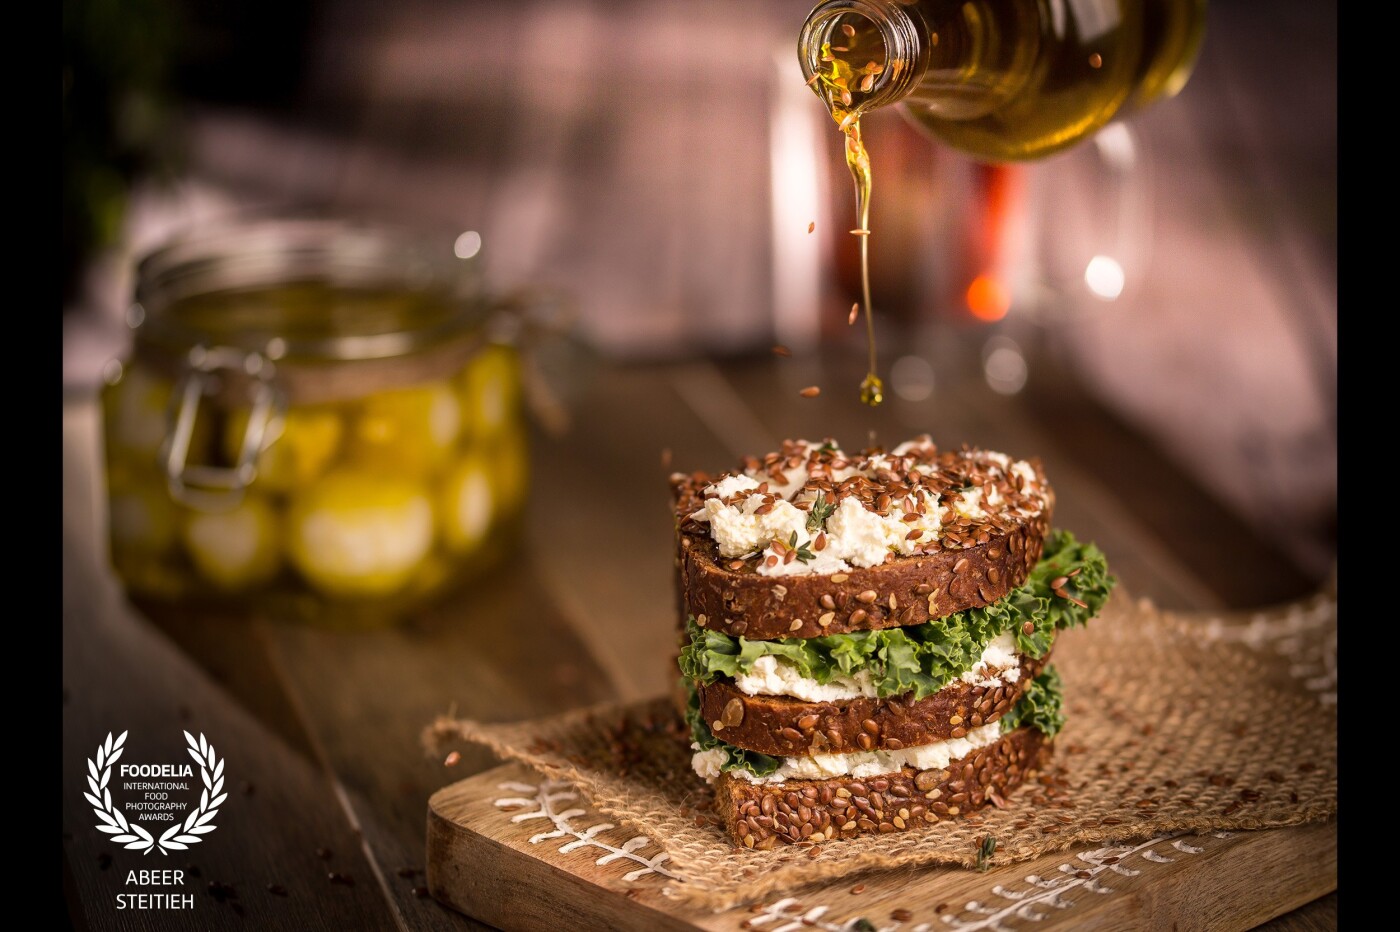 This sophisticated piece of heaven will take you back to your childhood reminiscences of your mom’s traditional loved flavors. This gourmet Labneh sandwich is made with delicious multi-grain bread and layers of a unique sharp salty flavor of Labneh topped with toasted sesame seeds and a generous drizzle of extra virgin olive oil. 